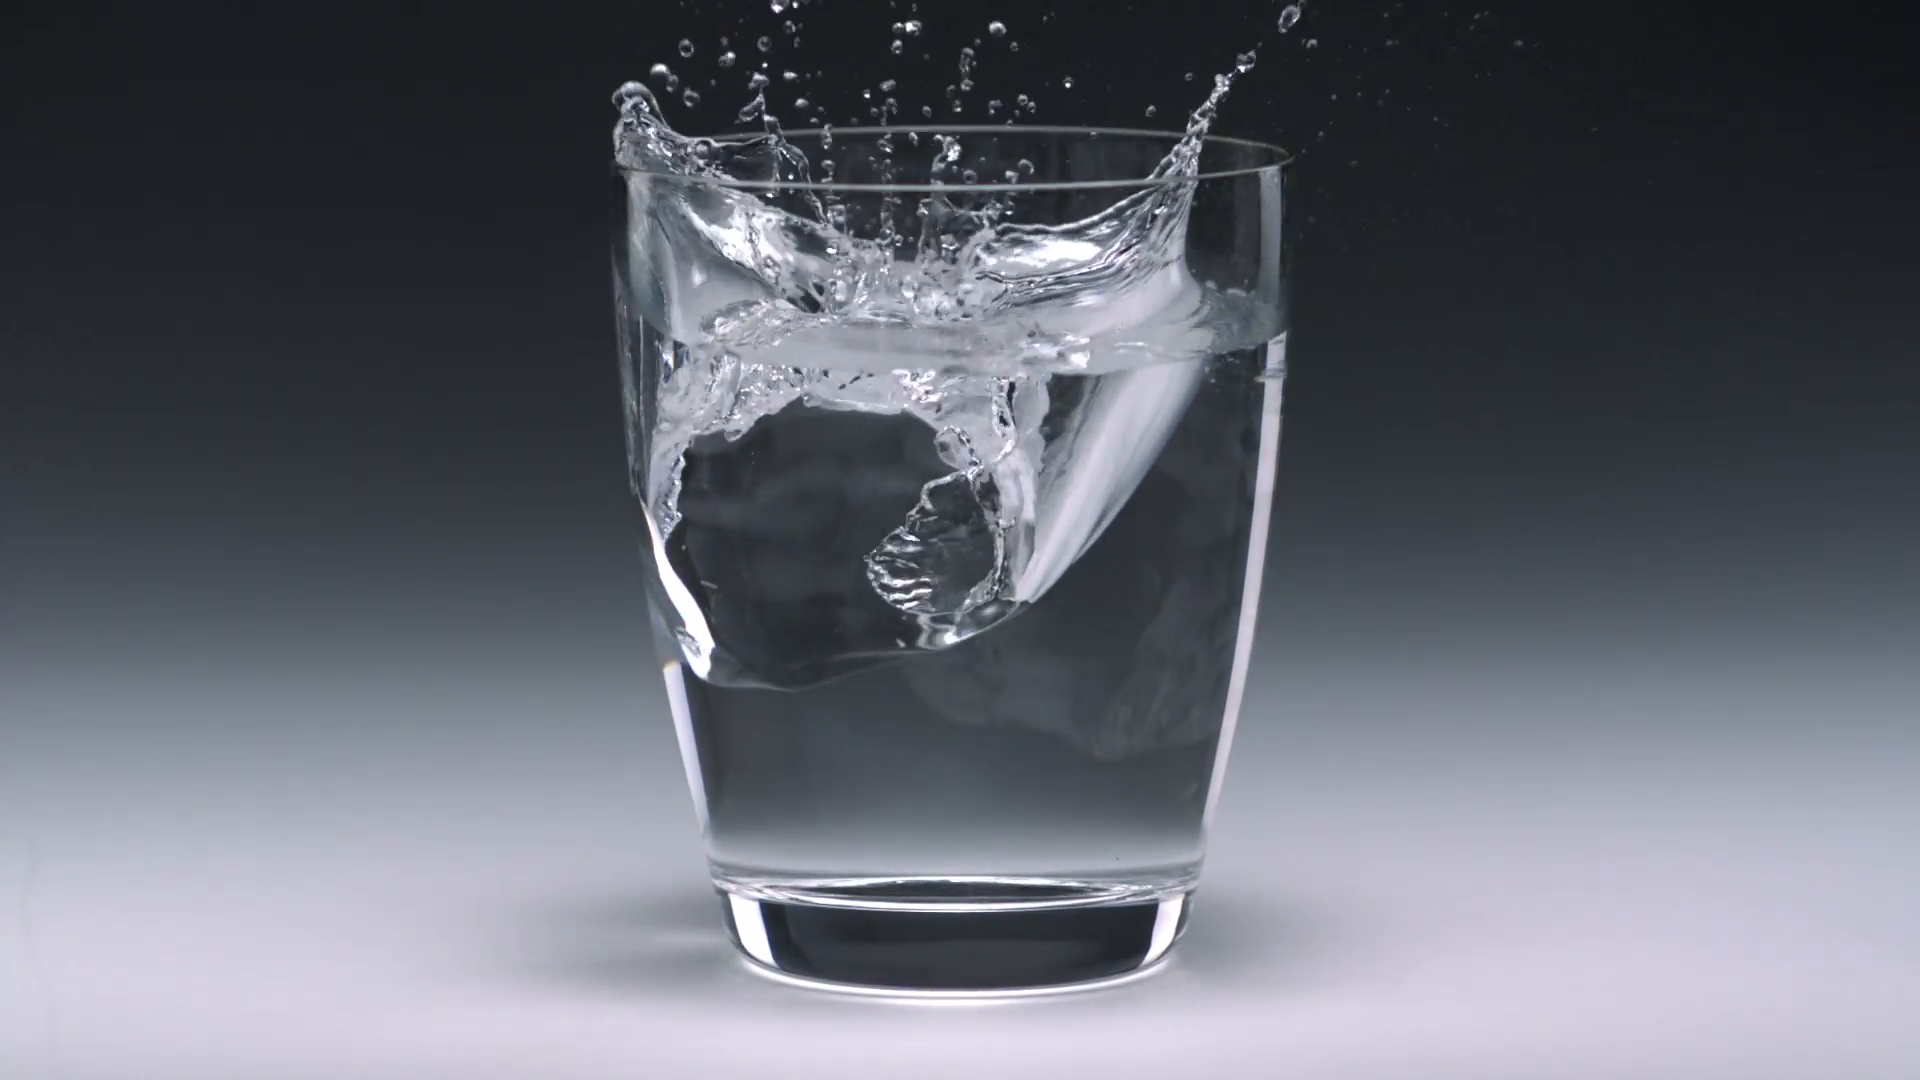 Ice cubes in a glass with water - Slow Motion Stock Video Footage ...